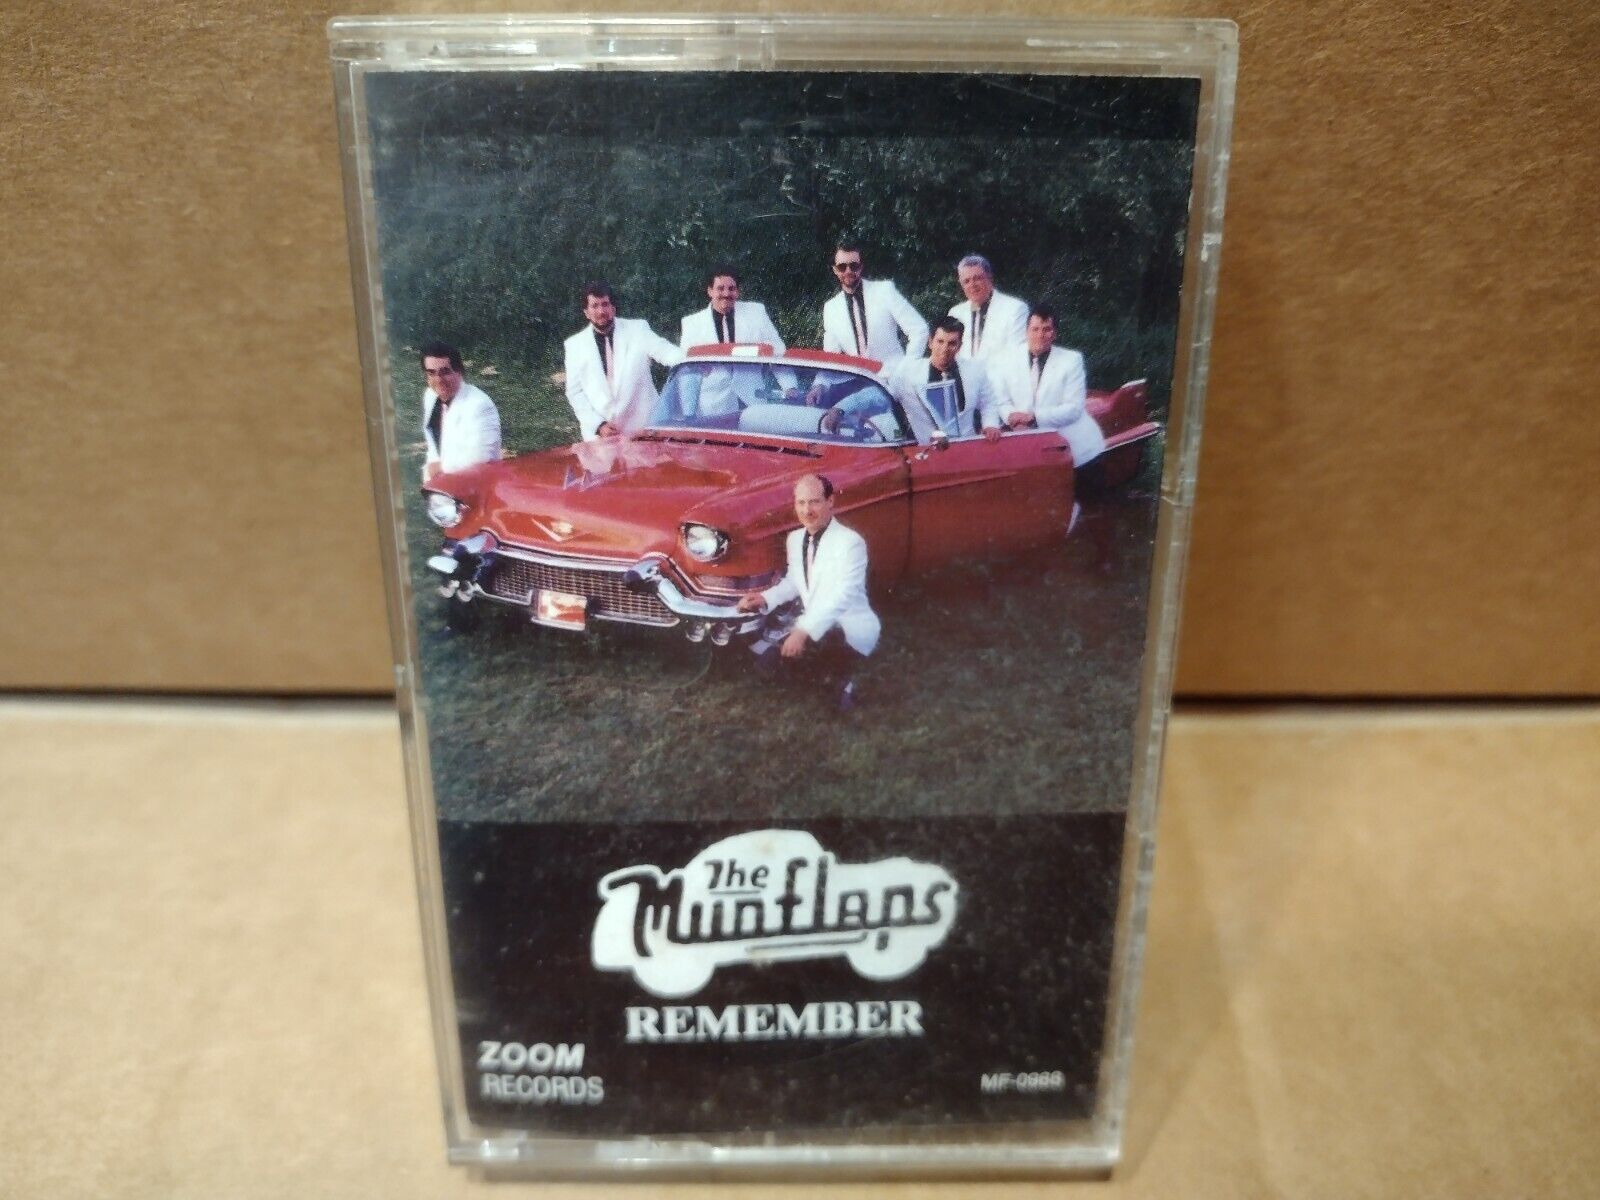 Cassette Tape Of The Mudflaps.  Oldies  $5.99   